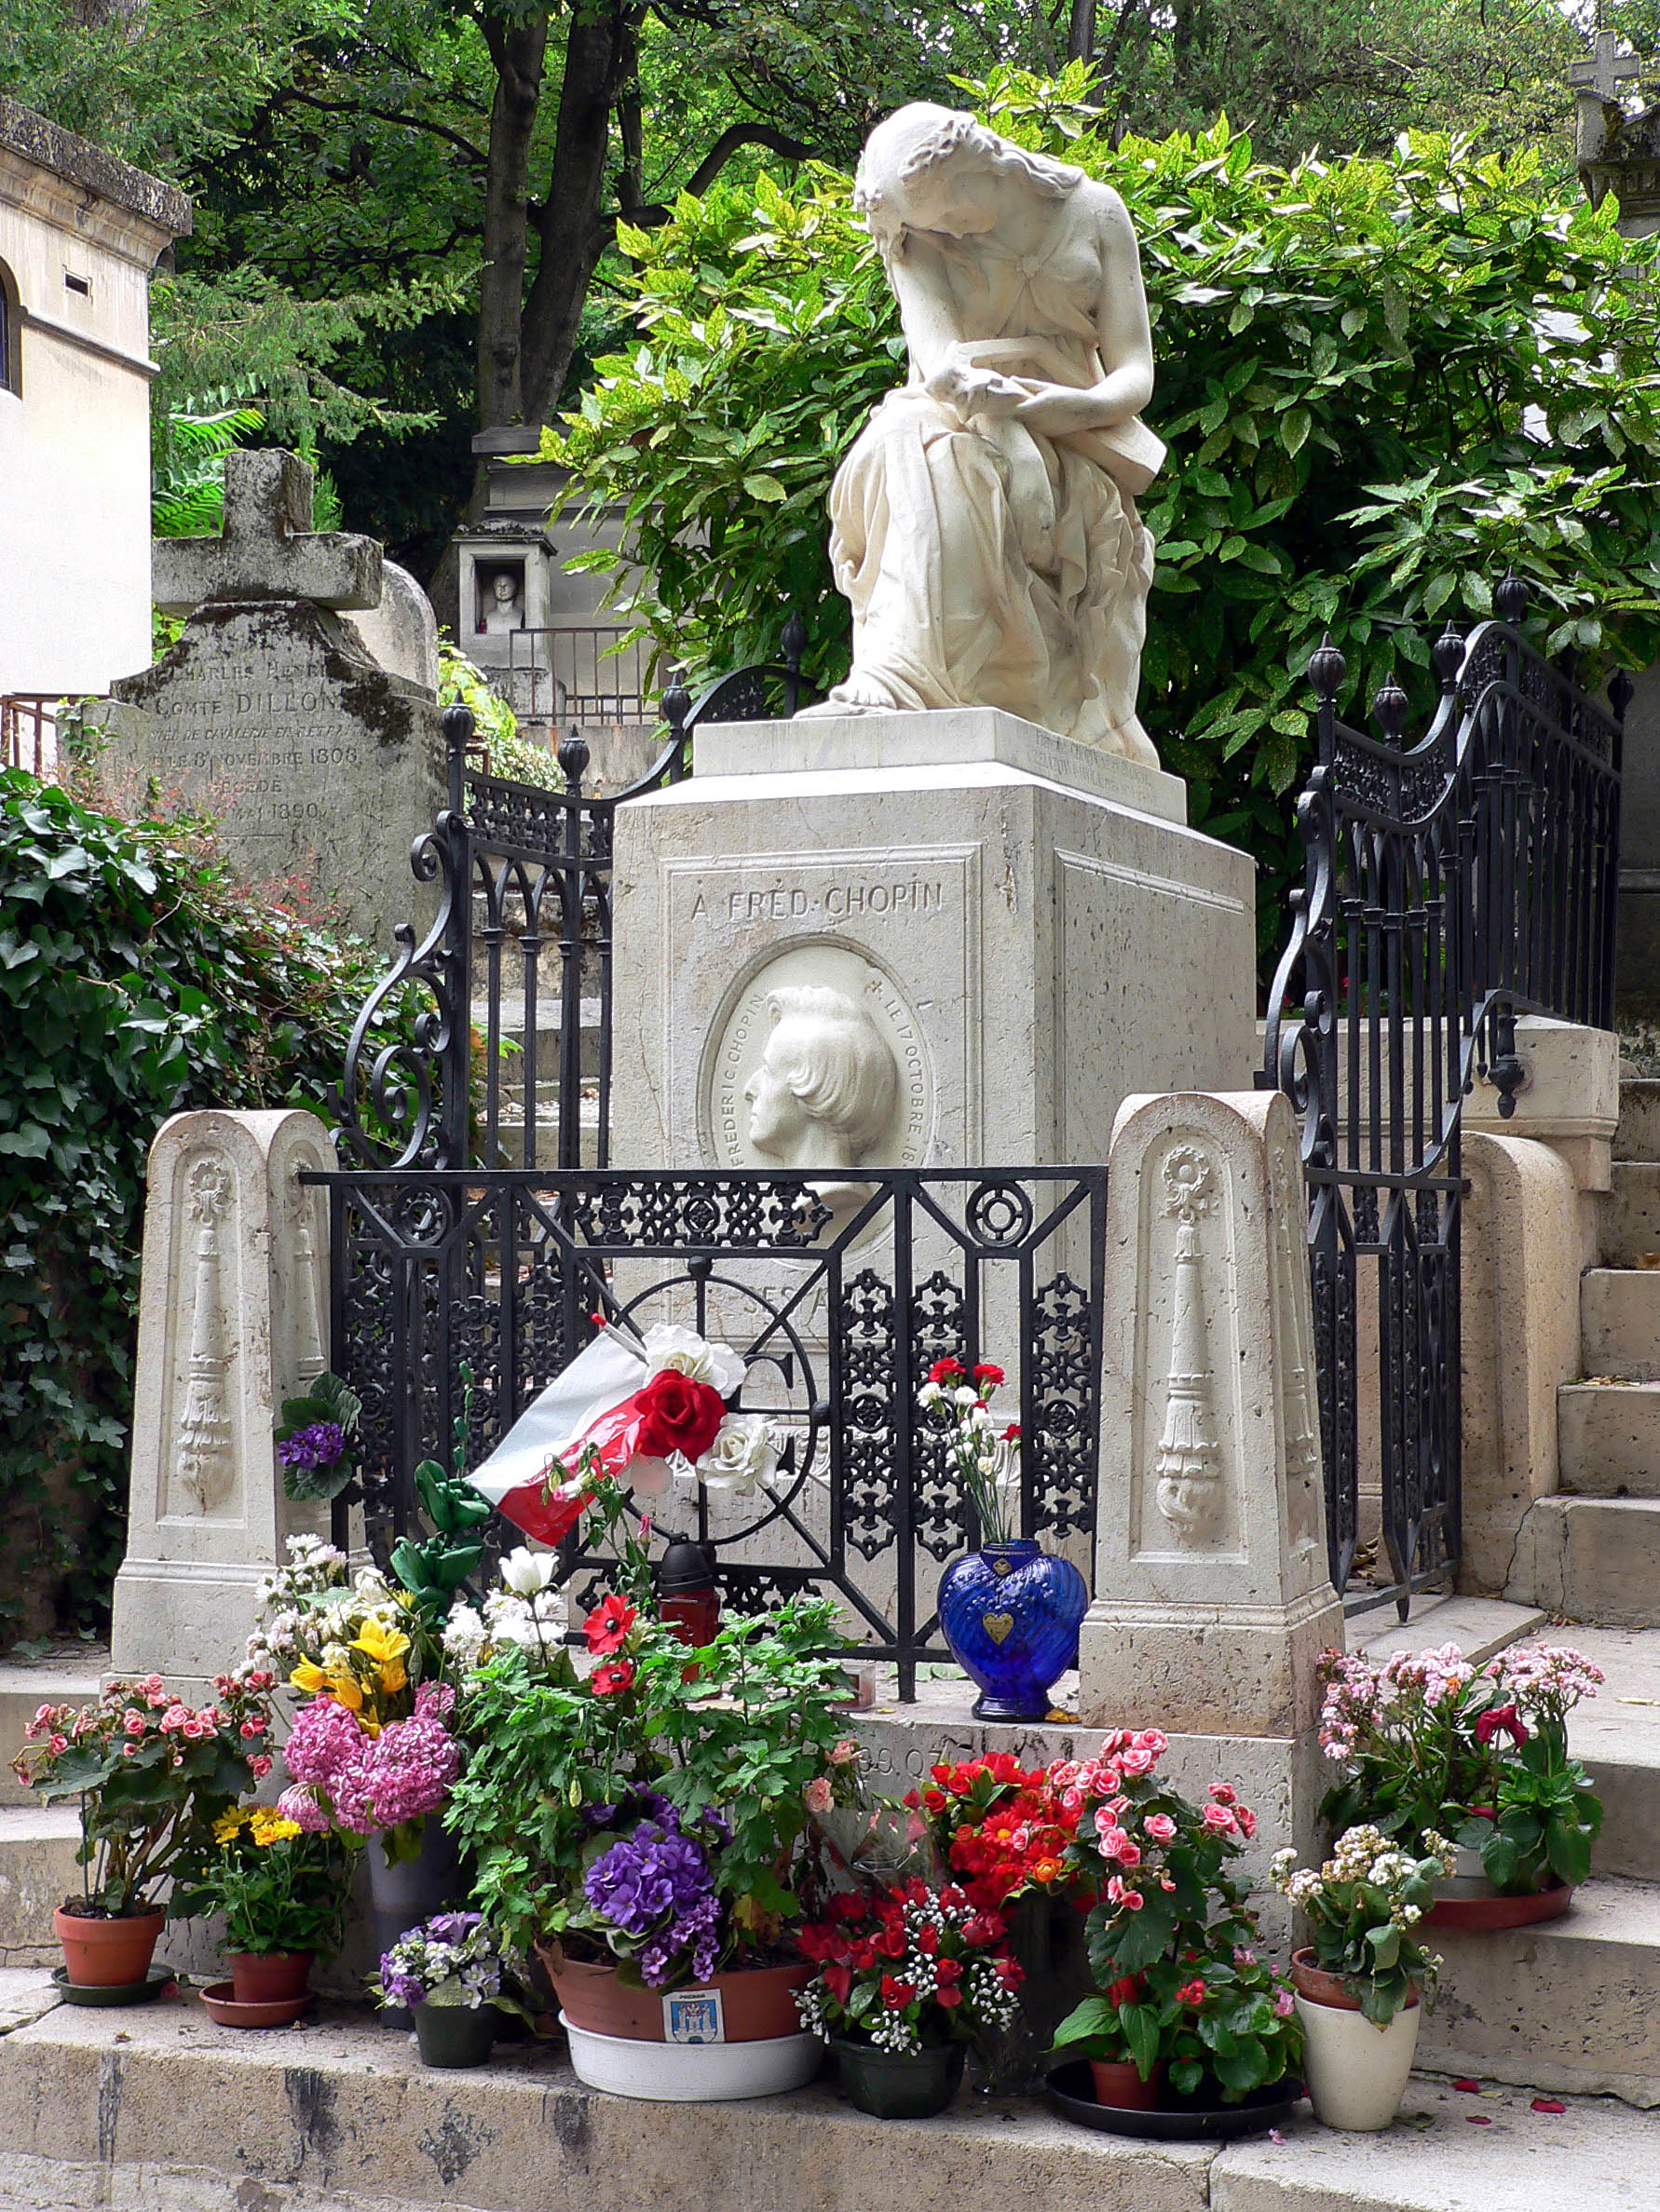 http://fr.academic.ru/pictures/frwiki/80/Pere-Lachaise_Chopin_grave.jpg